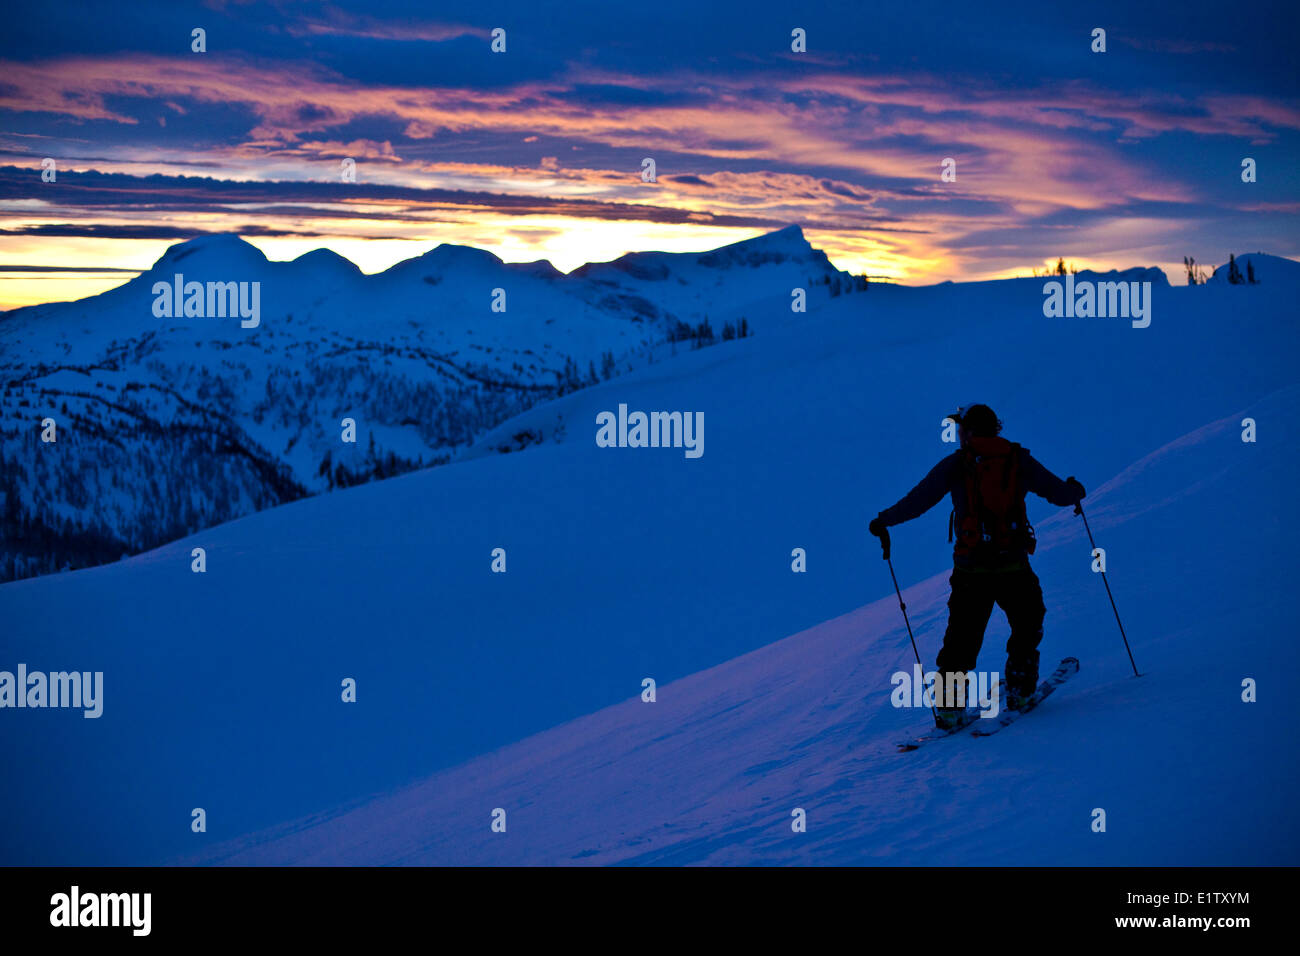 A male backcountry skier takes a moment to enjoy sunset at Sol Mountain, Monashee Backcountry, Revelstoke, BC Stock Photo